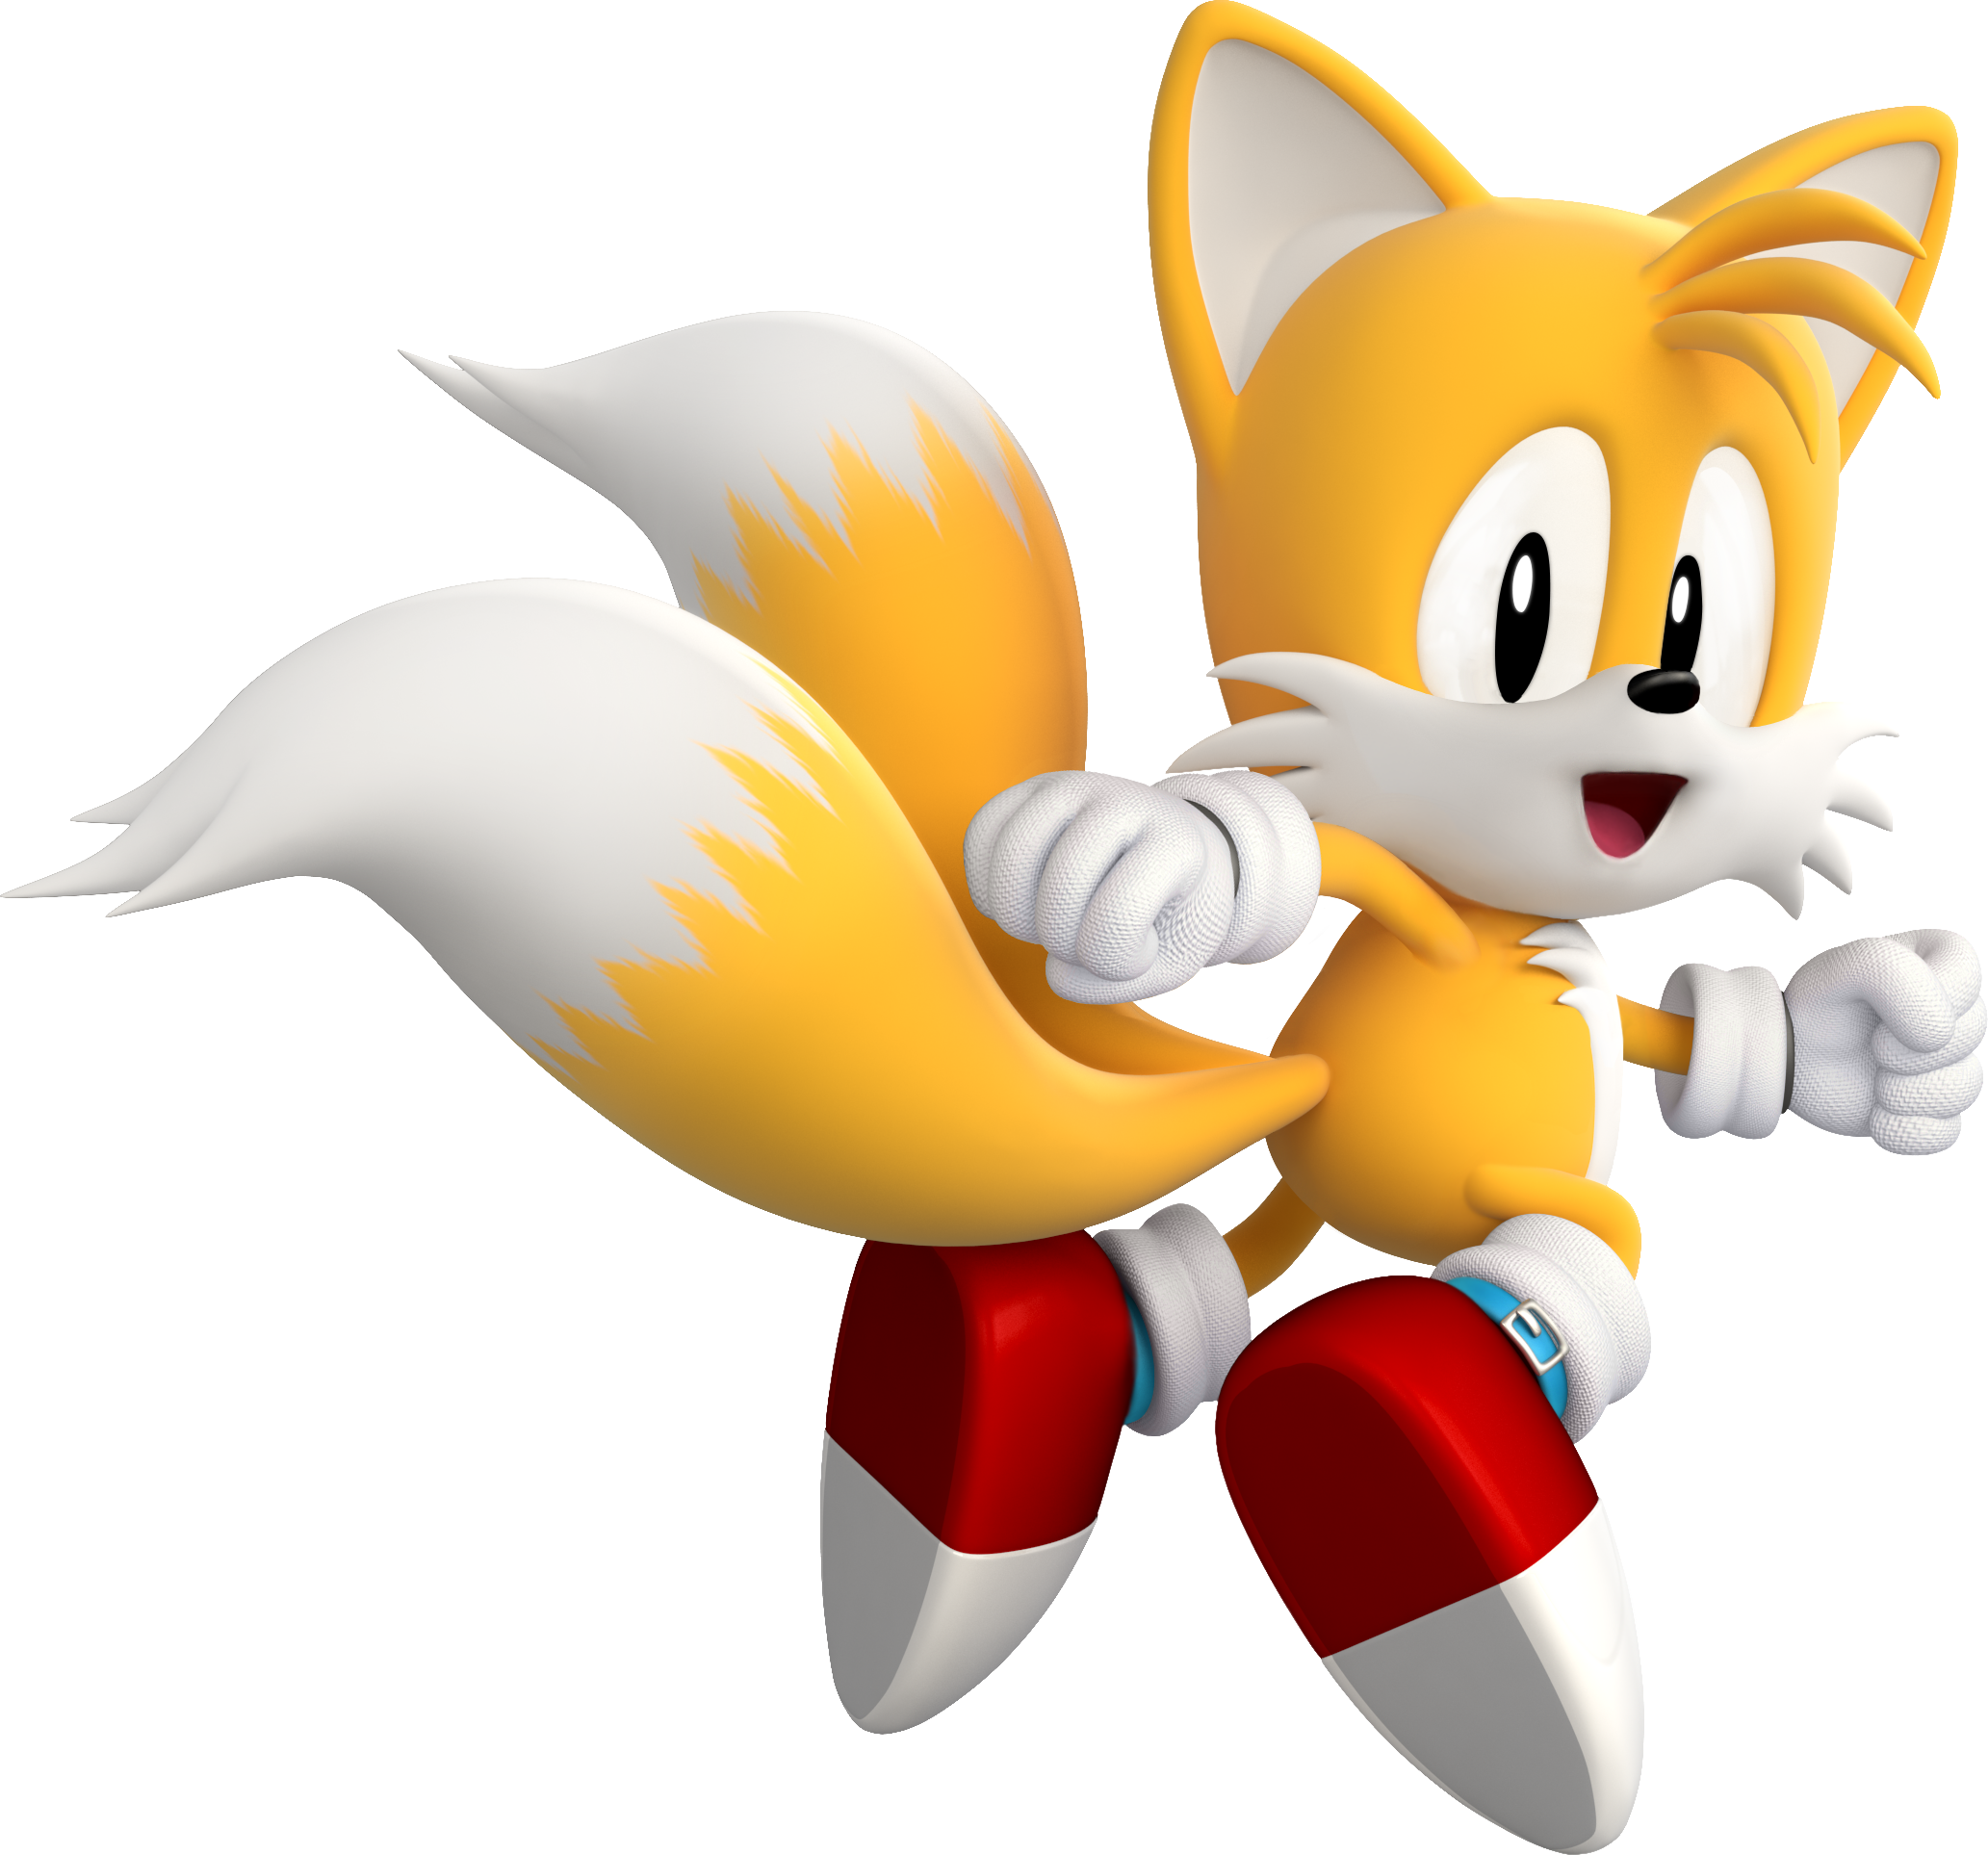 SG_classic_Tails.png